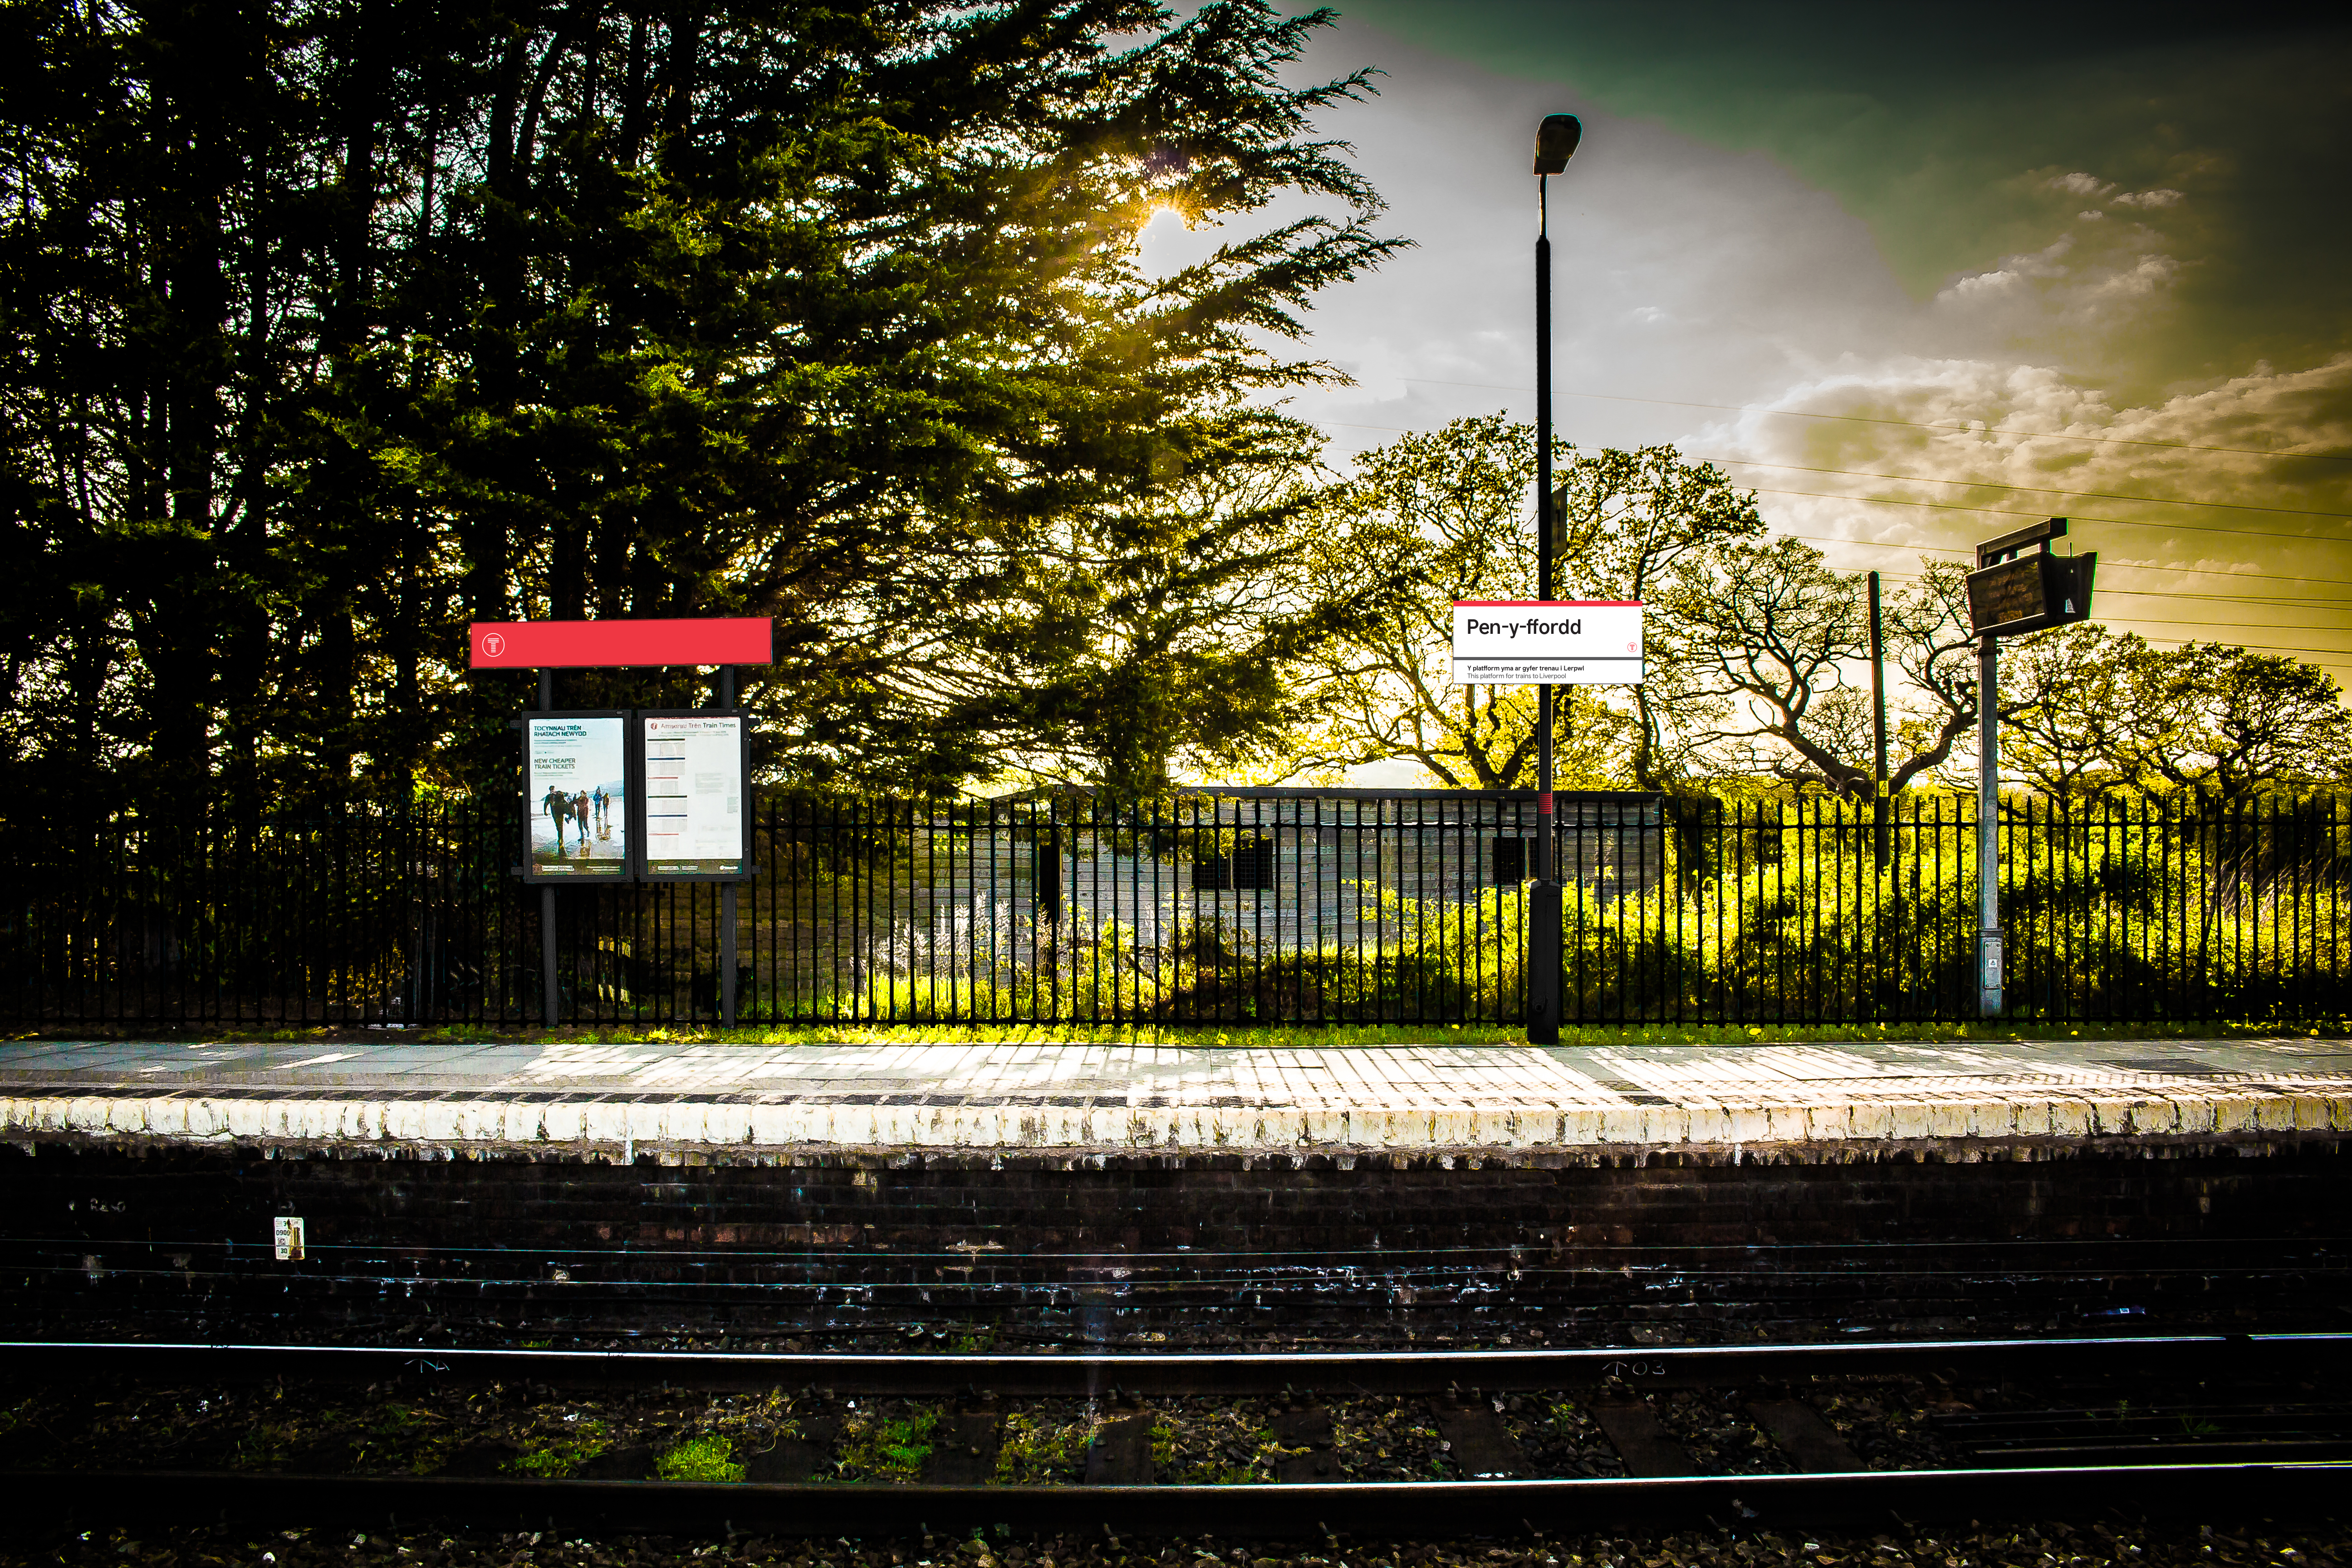 an artist's impression of how Pen y Ffordd Station will look with new signage